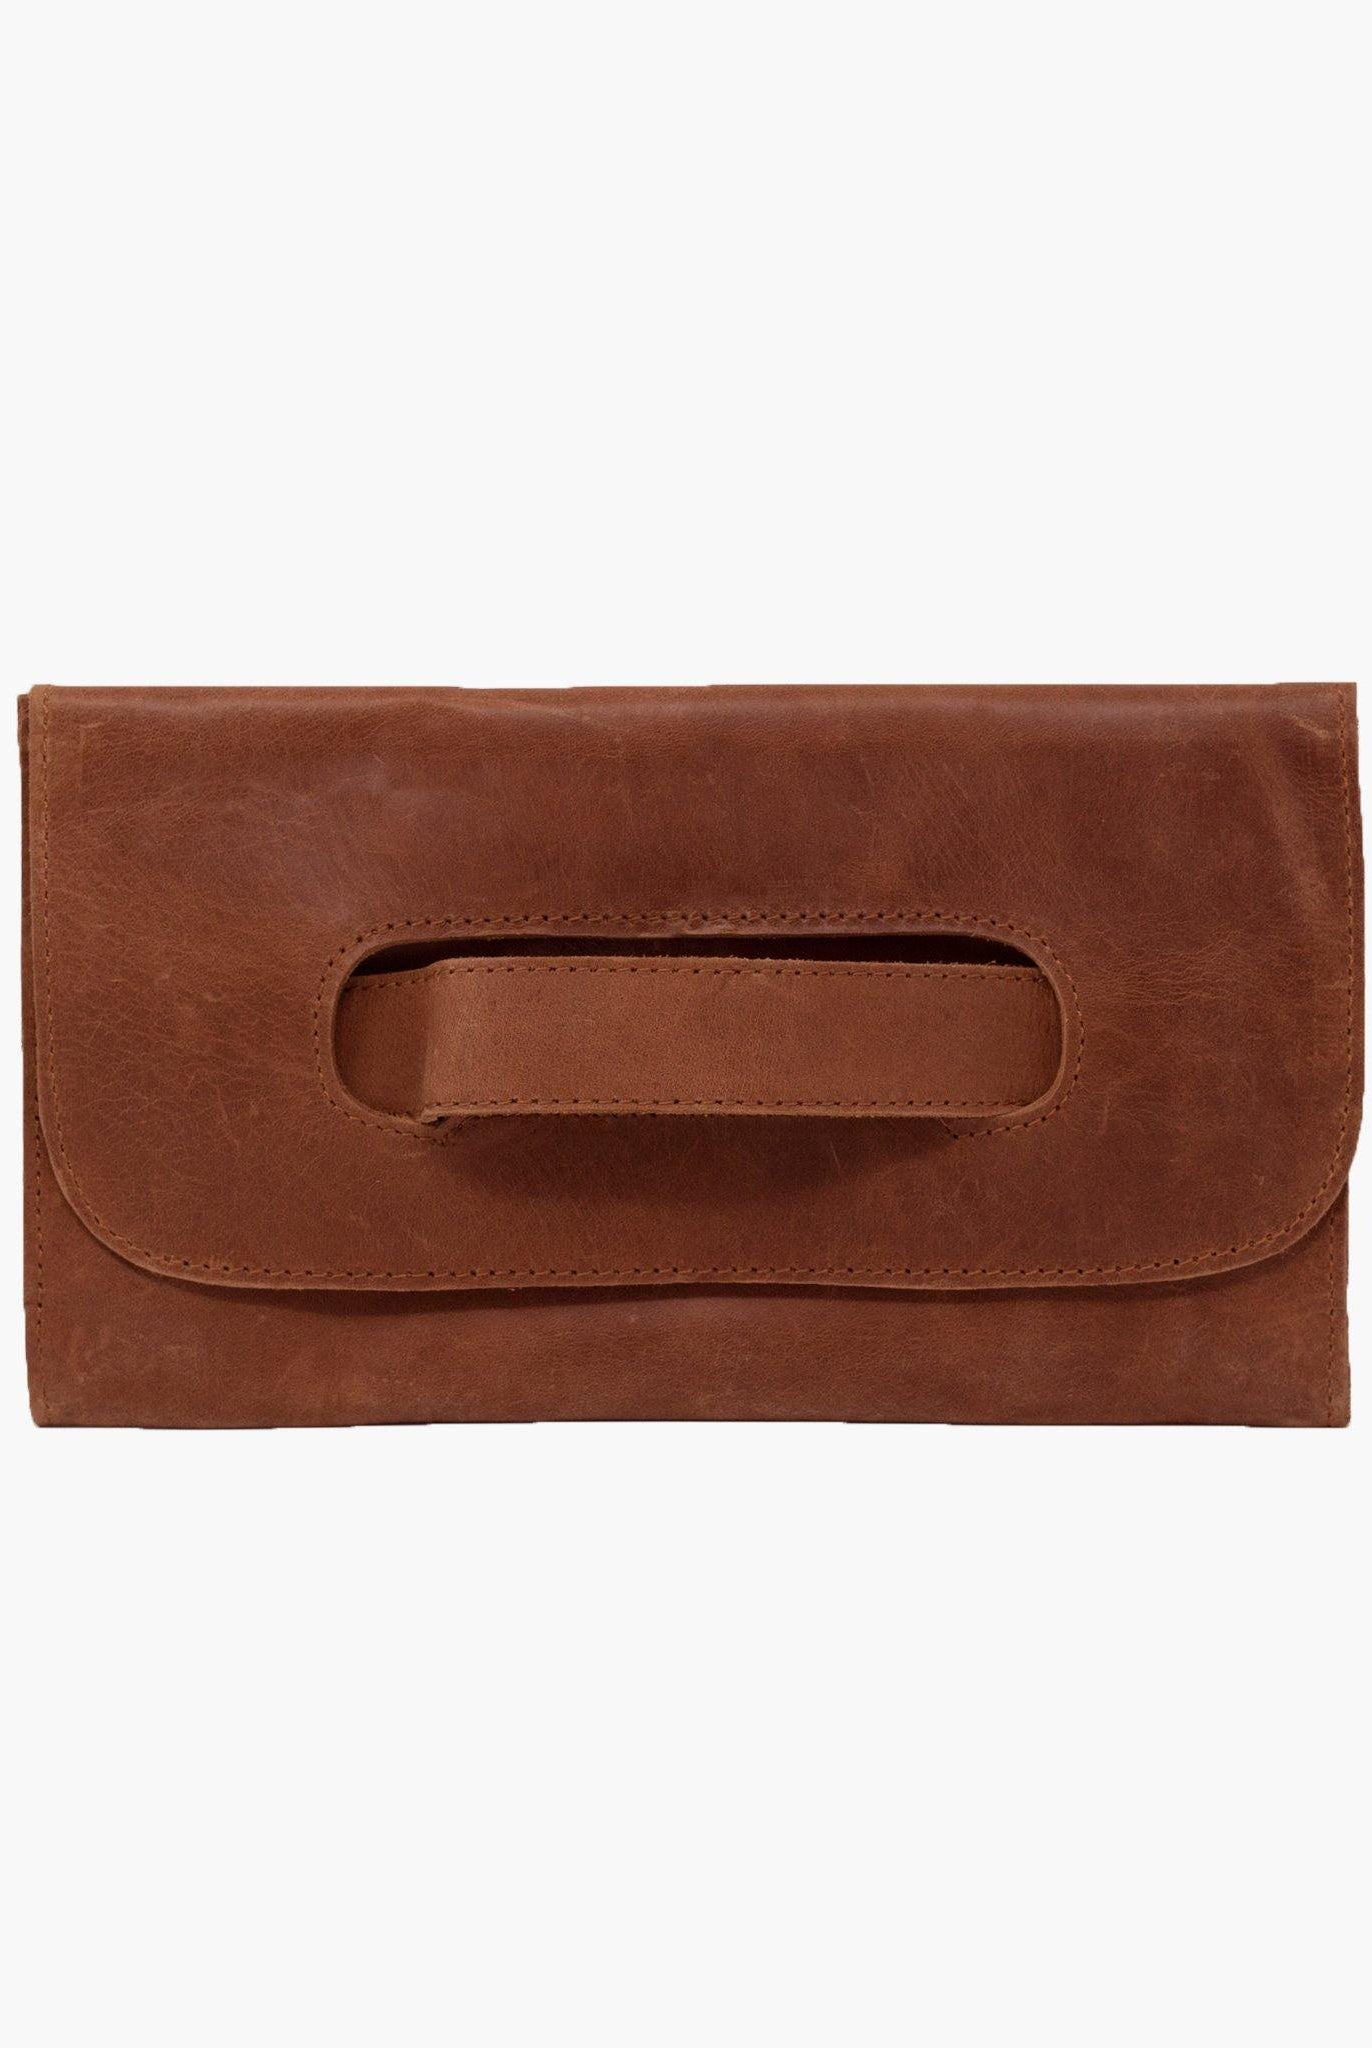 Mare Handle Clutch, Whiskey - Rose & Lee Co